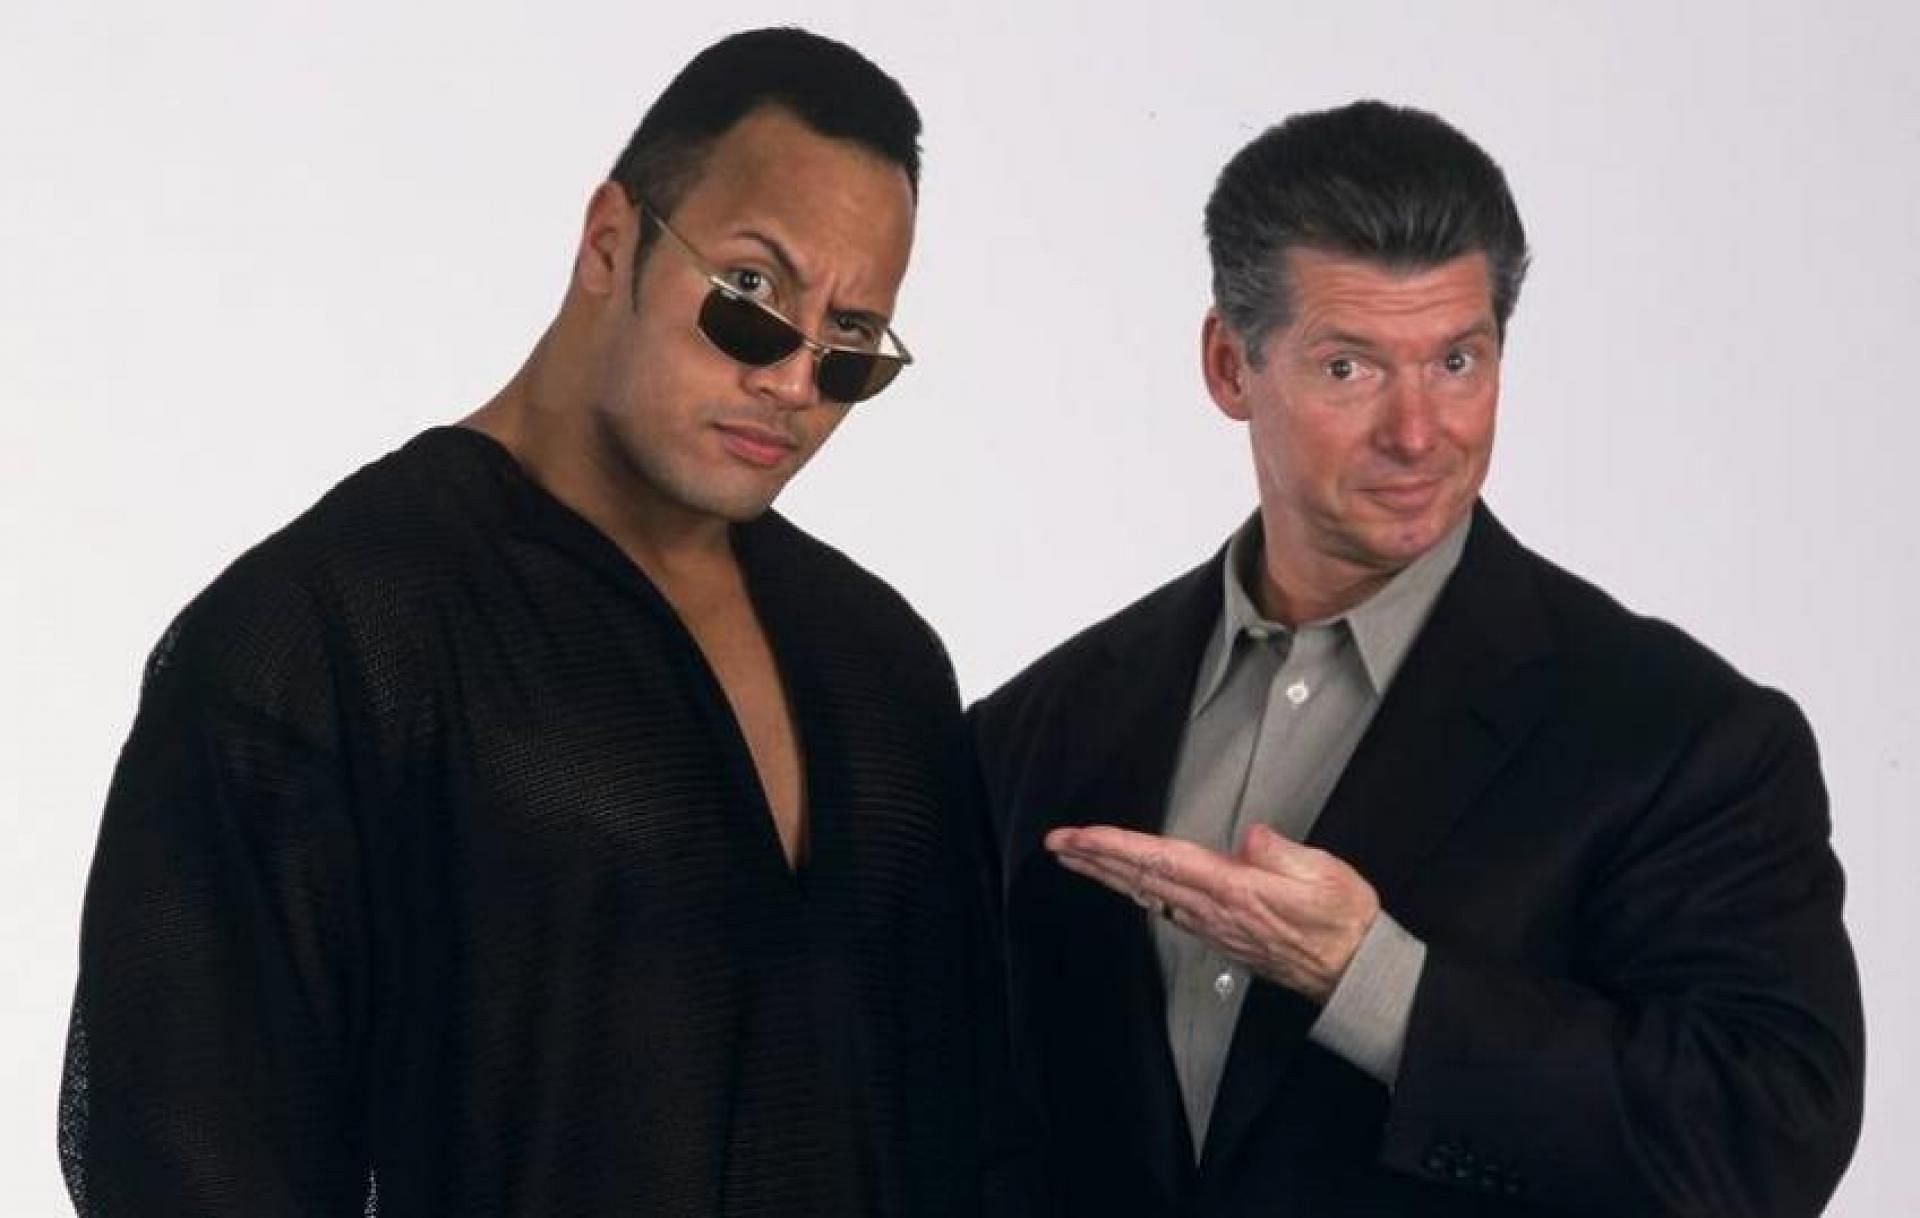 The Rock and Vince McMahon during WWF